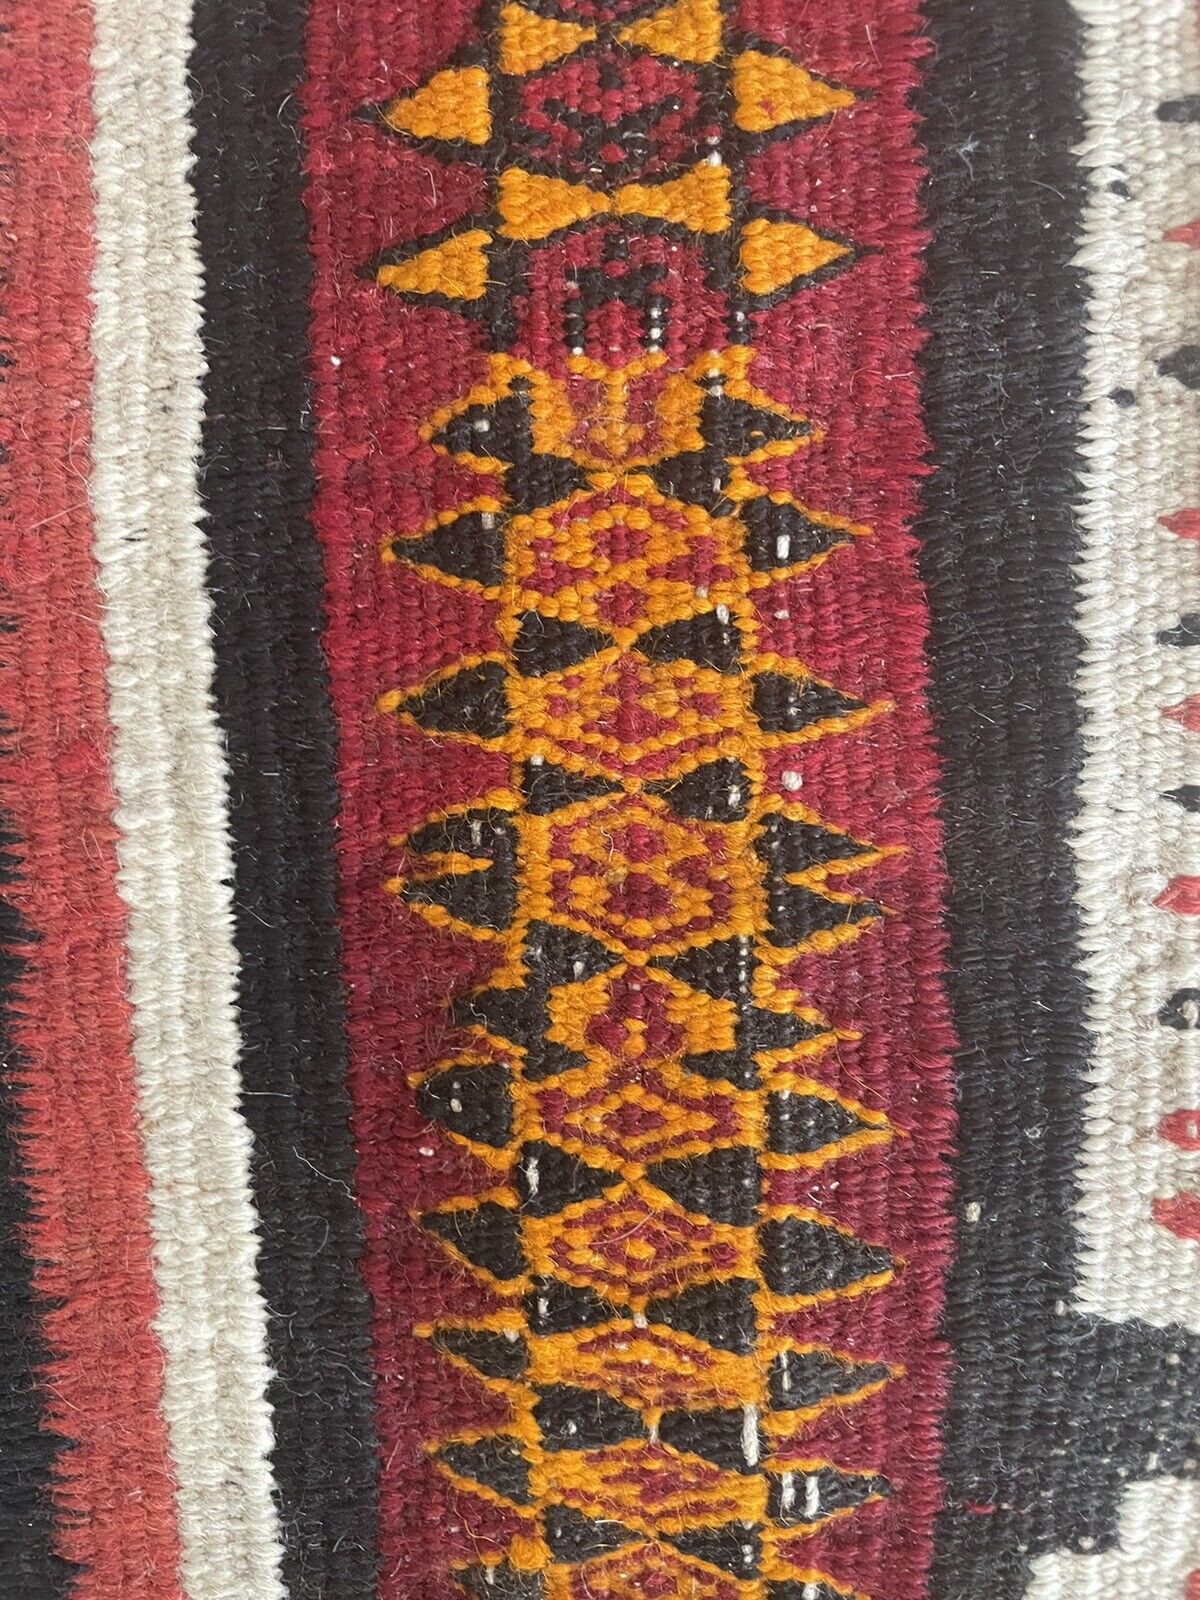 Close-up of authenticity on Handmade Antique Moroccan Berber Kilim Rug - Detailed view highlighting the rug's authenticity as a collectible piece cherished for its historical significance.